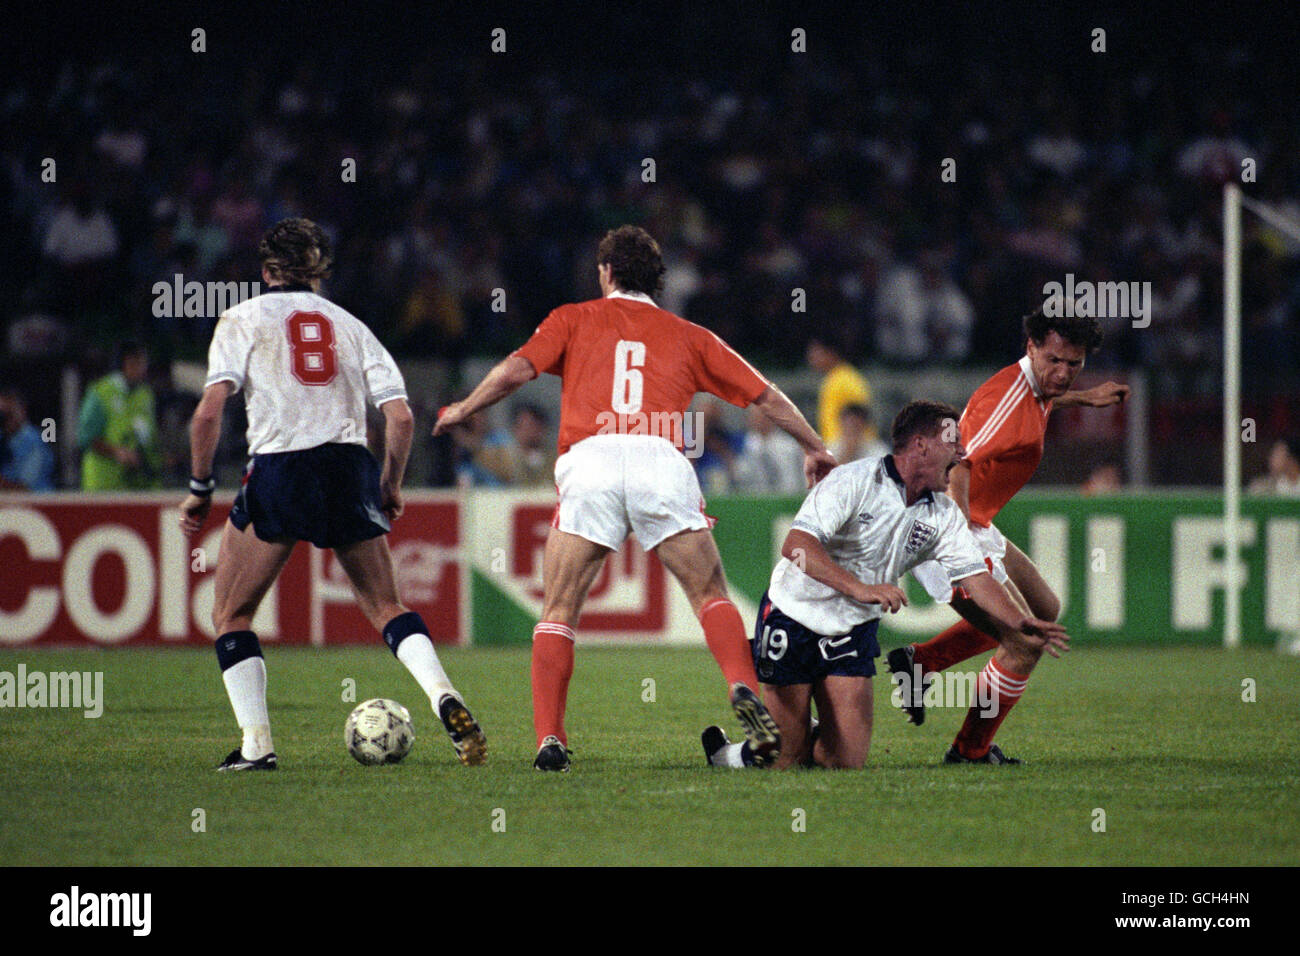 England's Paul Gascoigne is tackled by Netherlands' Hans GILLHAUS (r) and Jan WOUTERS (6) watched by England's Chris Waddle (8) Stock Photo